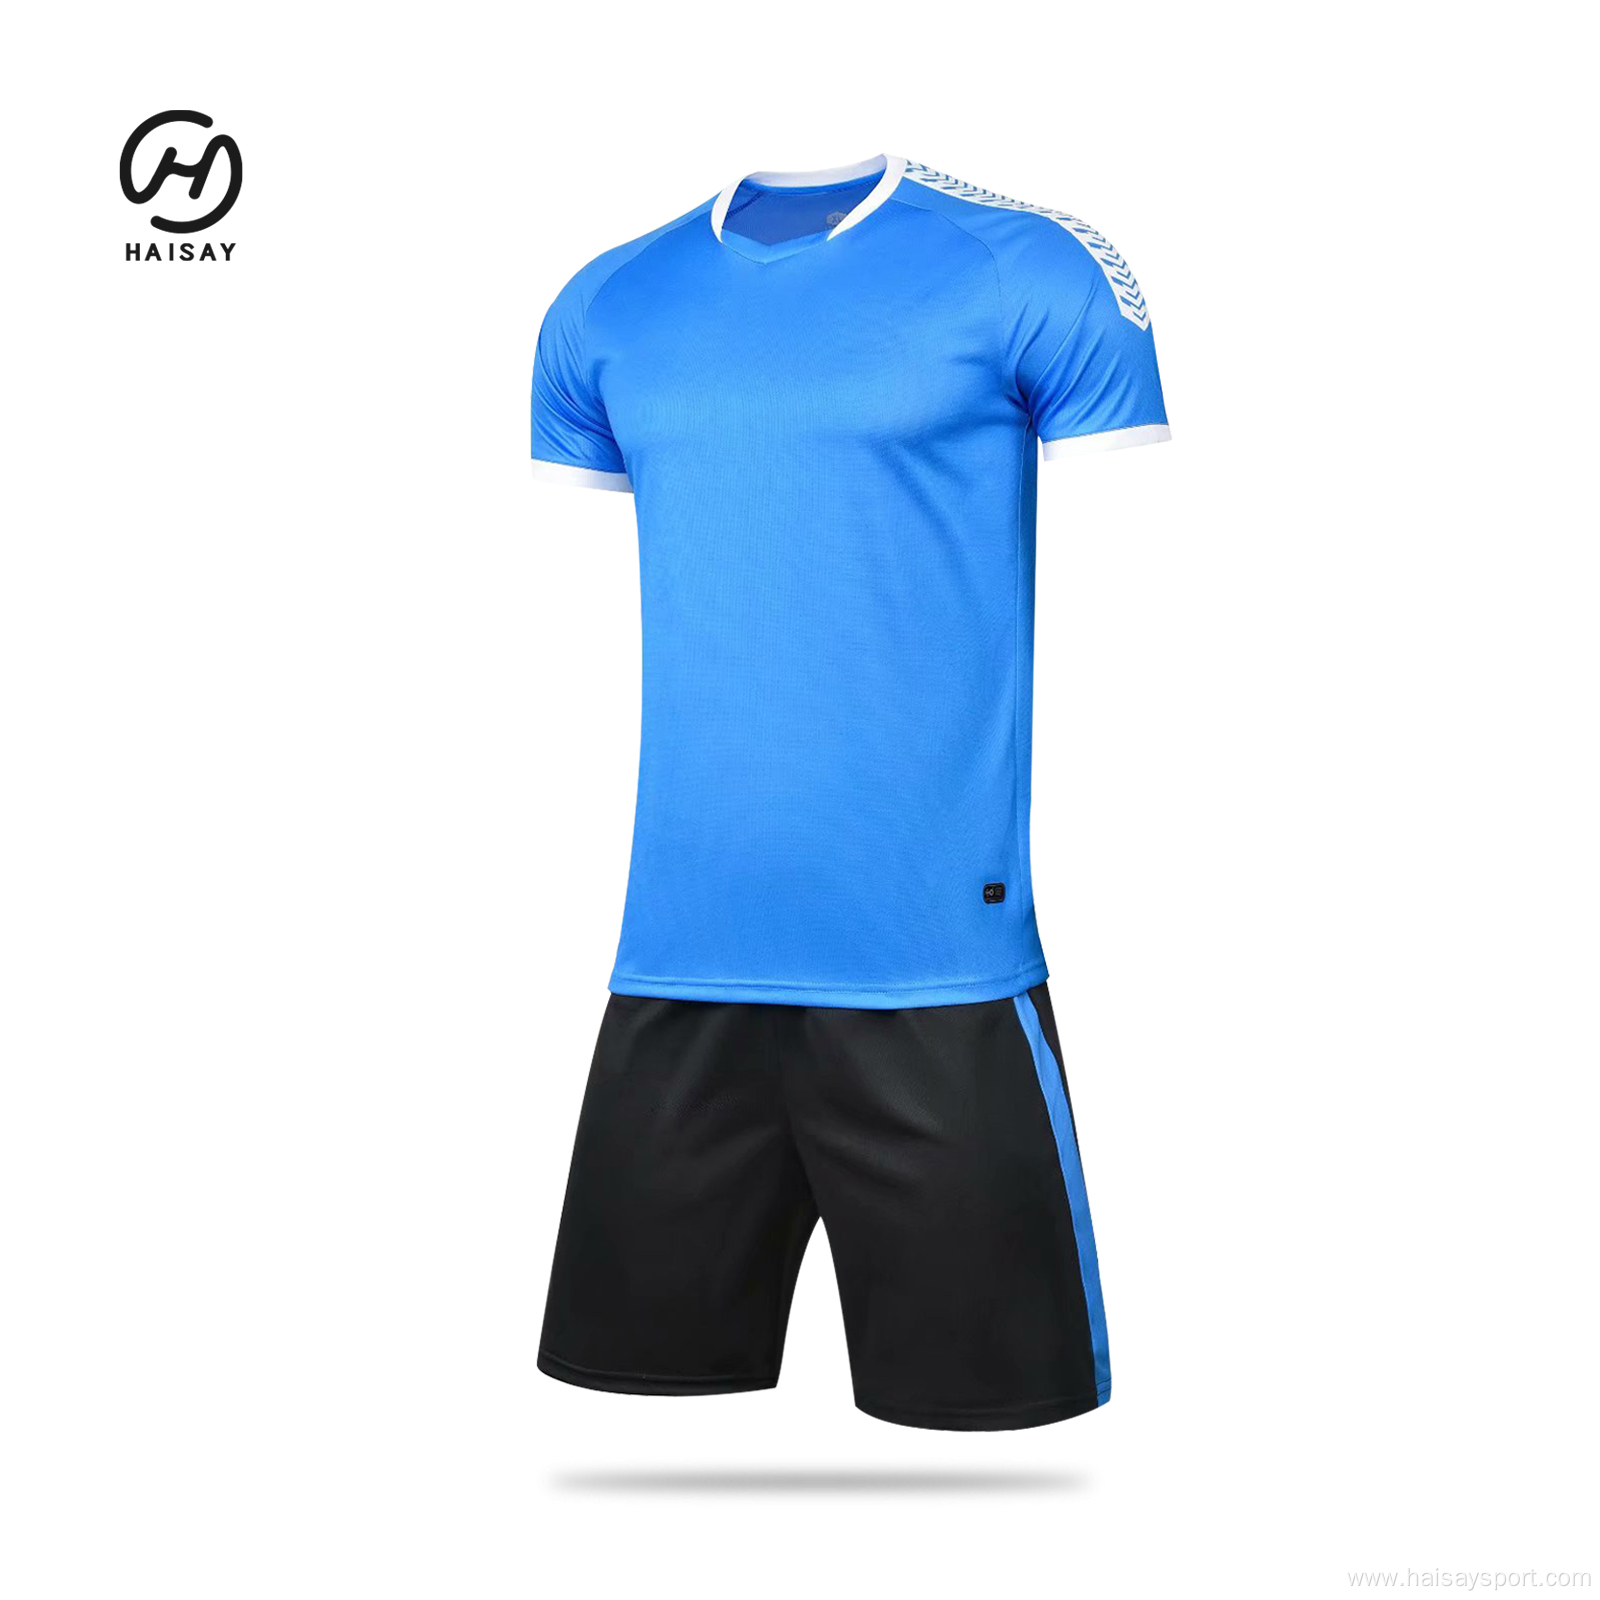 2022 New Model Men Soccer Jersey Suit High Quality Breathable Anti-fouling Sports Team Jerseys Soccer Football Blank Soccer Wear